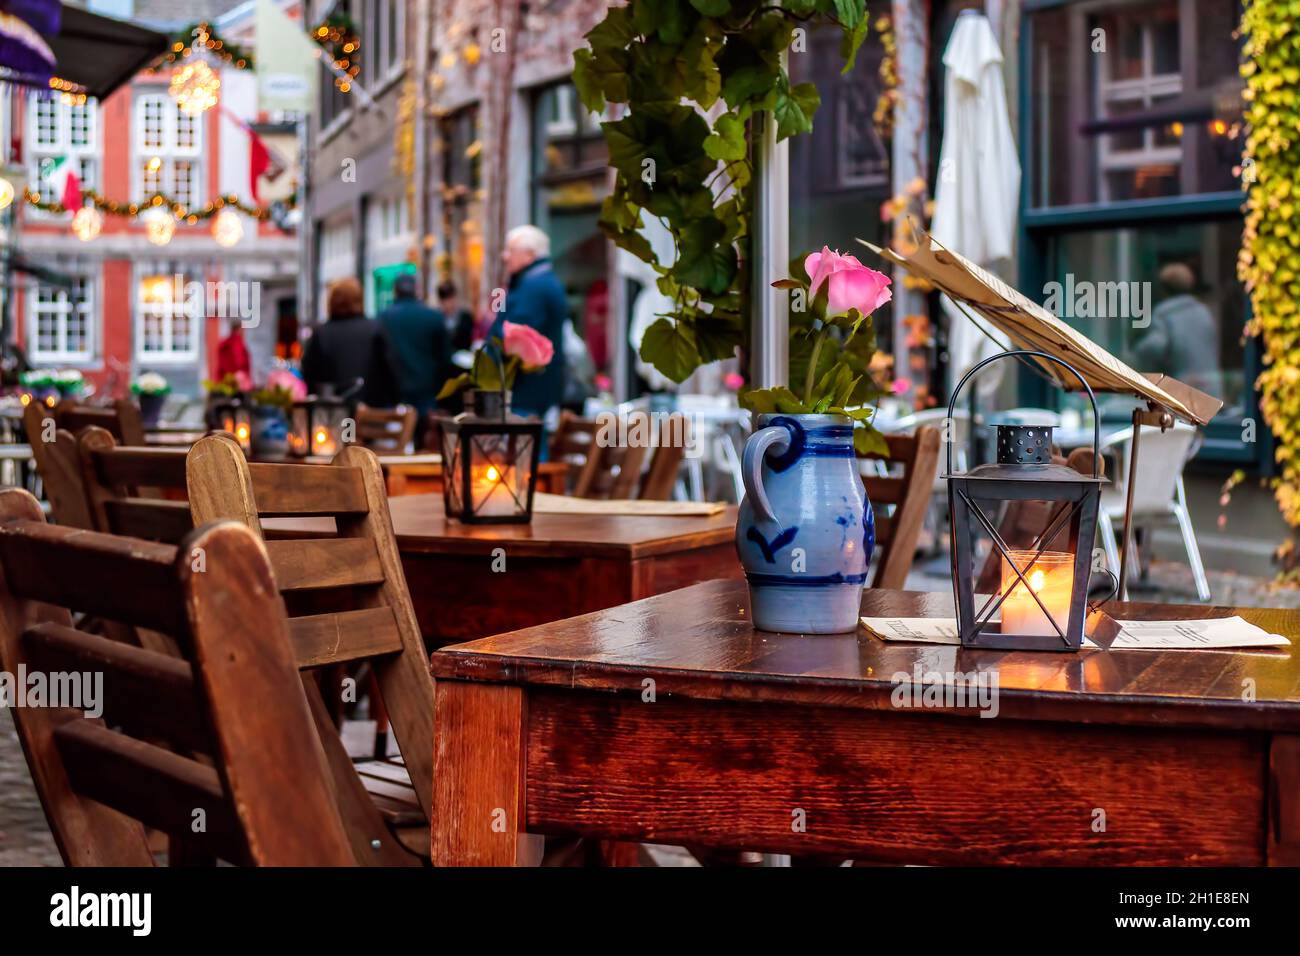 MAASTRICHT, THE NETHERLANDS - NOVEMBER 22, 2016: Empty dinner tables in front of a restaurant with tourists in the background in Maastricht Stock Photo